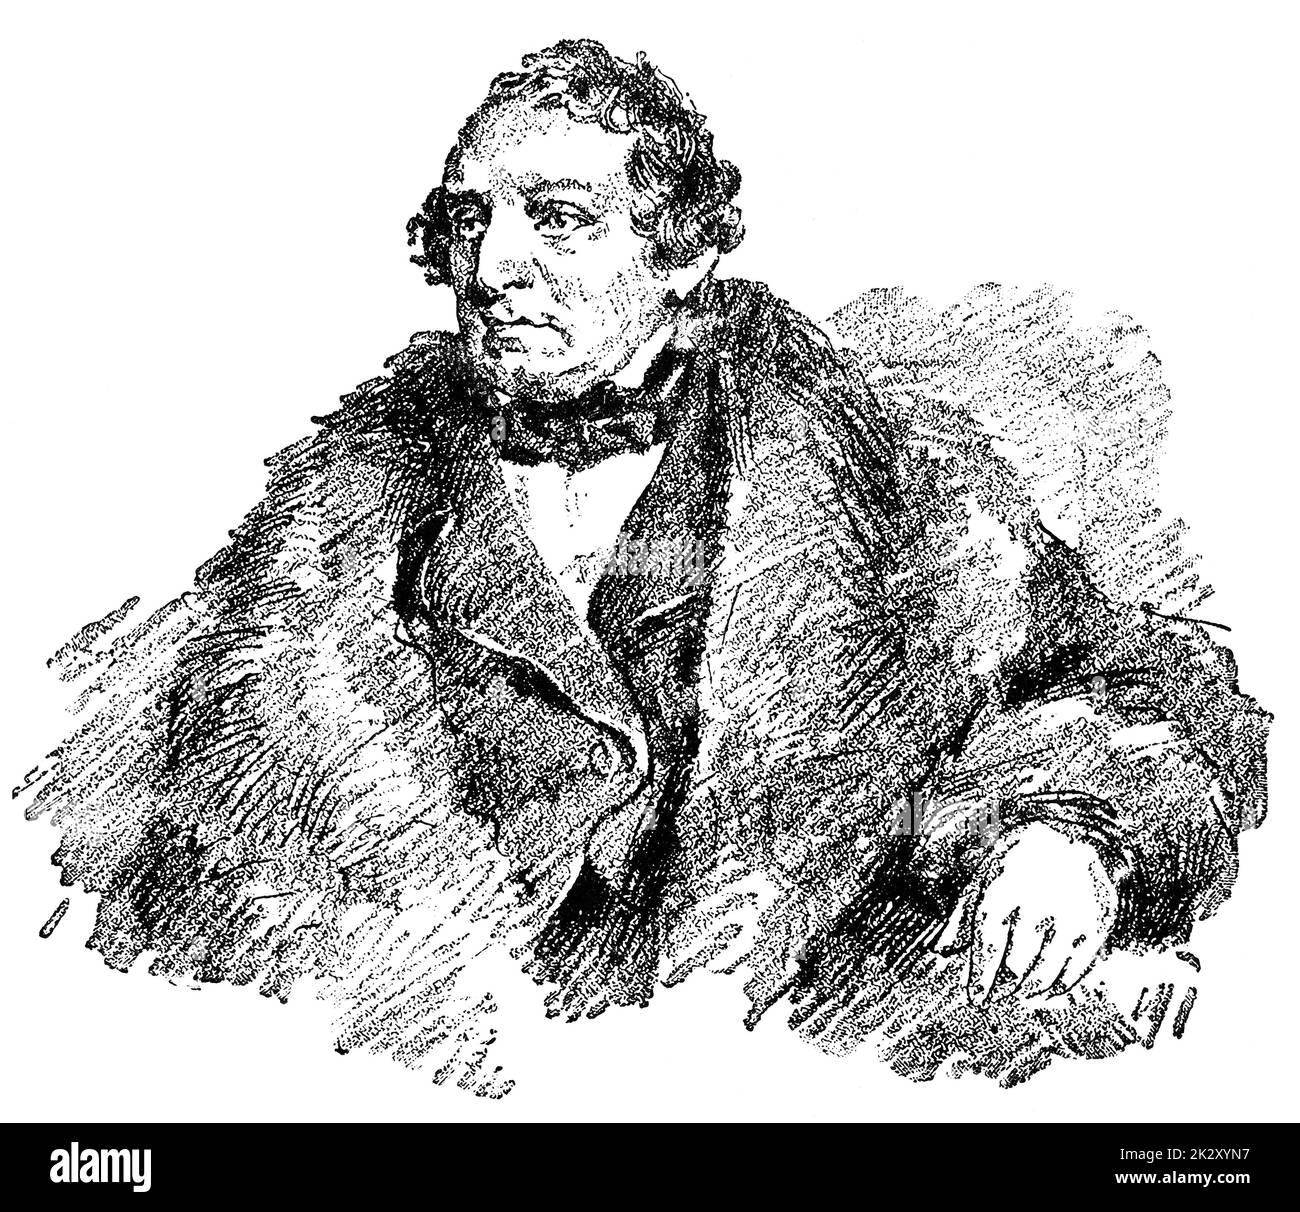 Portrait of Karl Anschutz - a German-born musical director and composer who founded the German Opera in New York City. Illustration of the 19th century. White background. Stock Photo